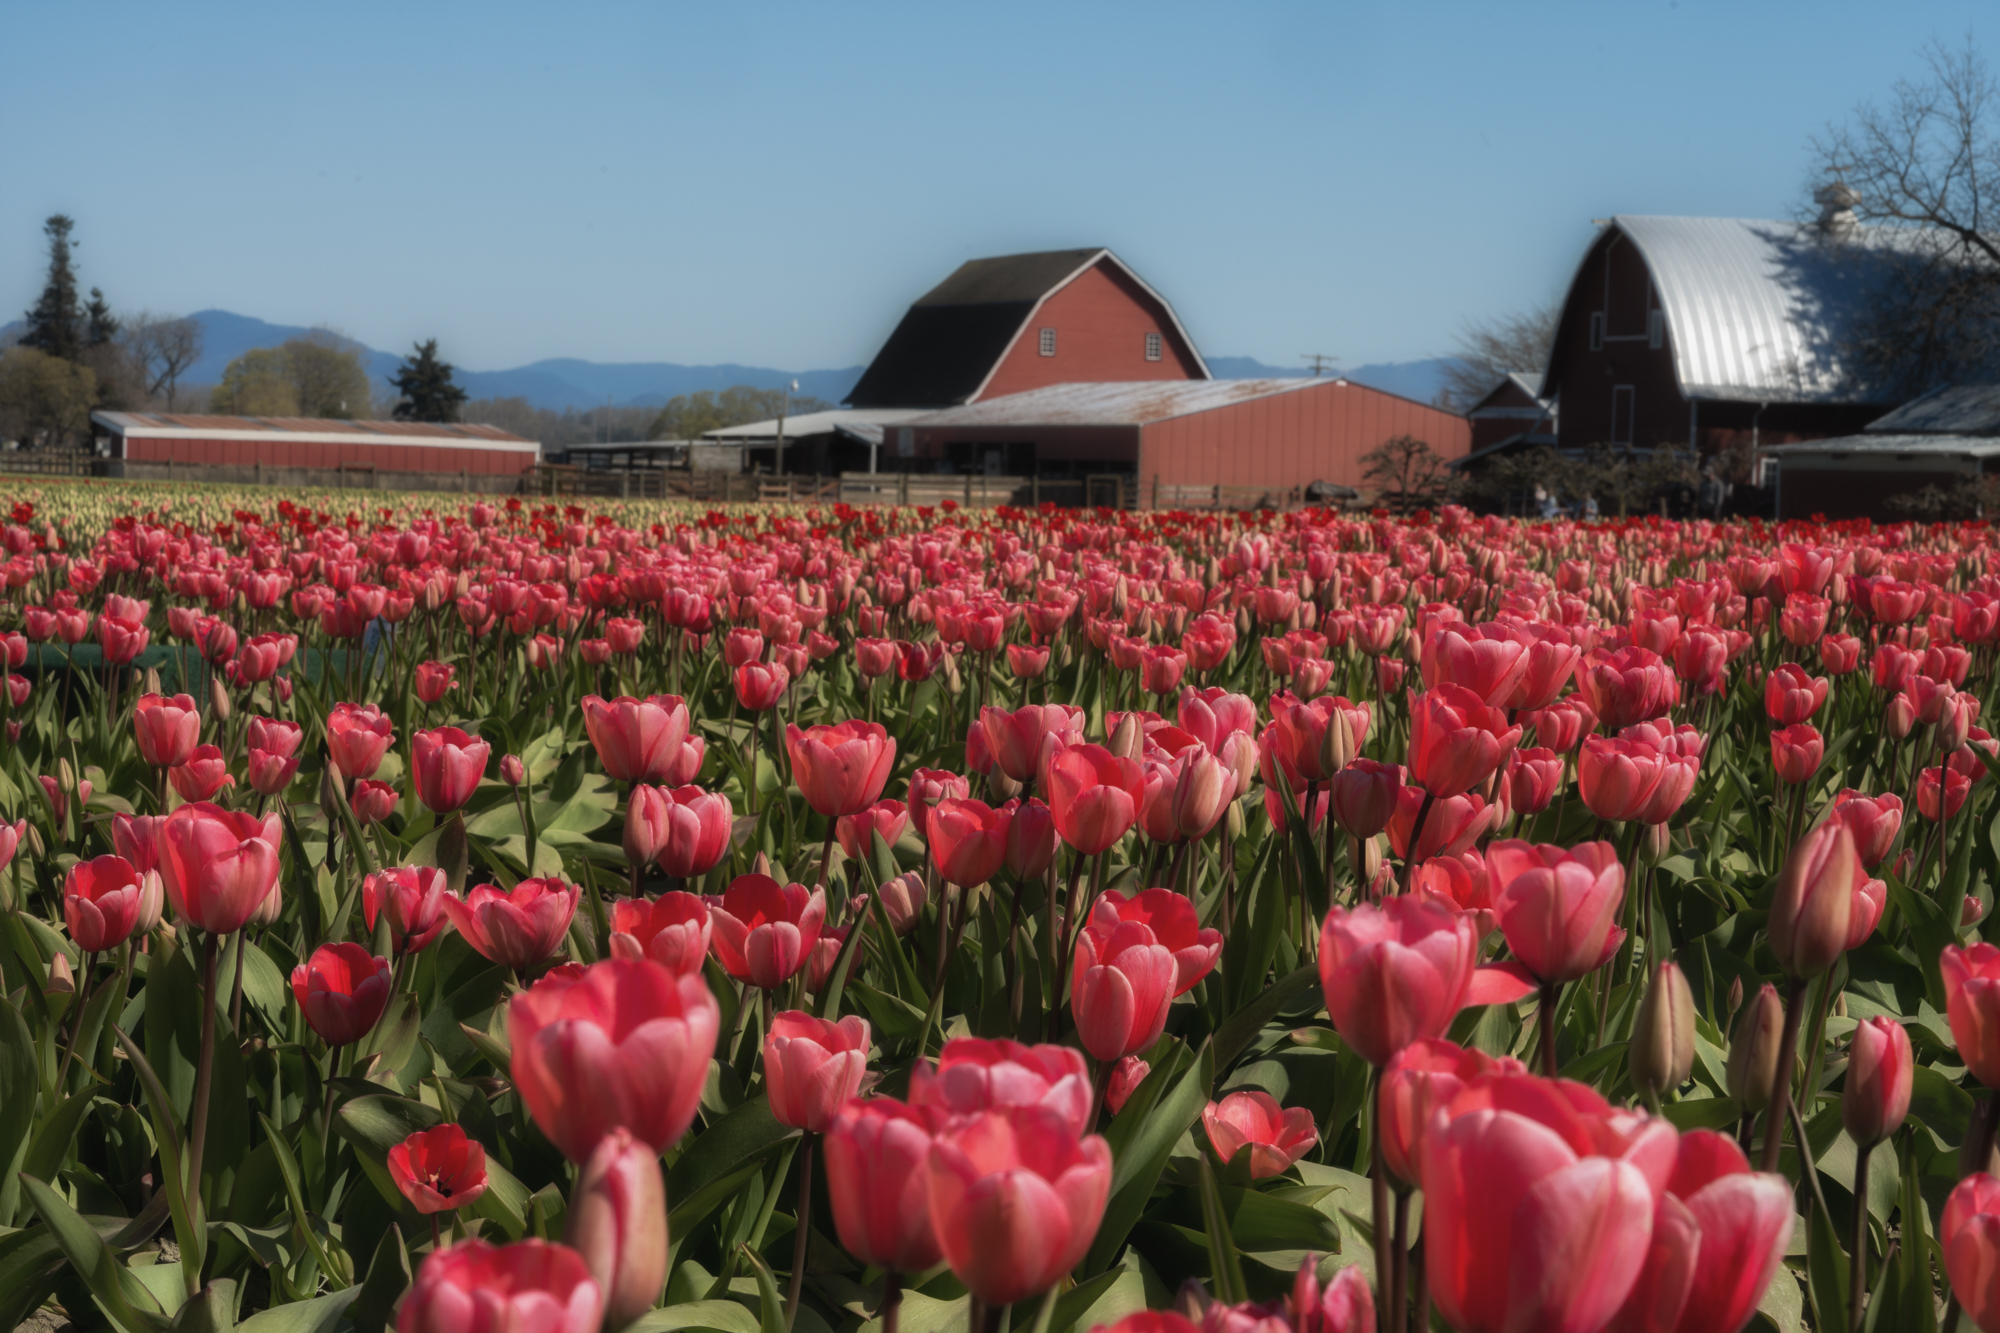 Skagit Valley Tulip Festival ⋆ Pacific Northwest and Beyond